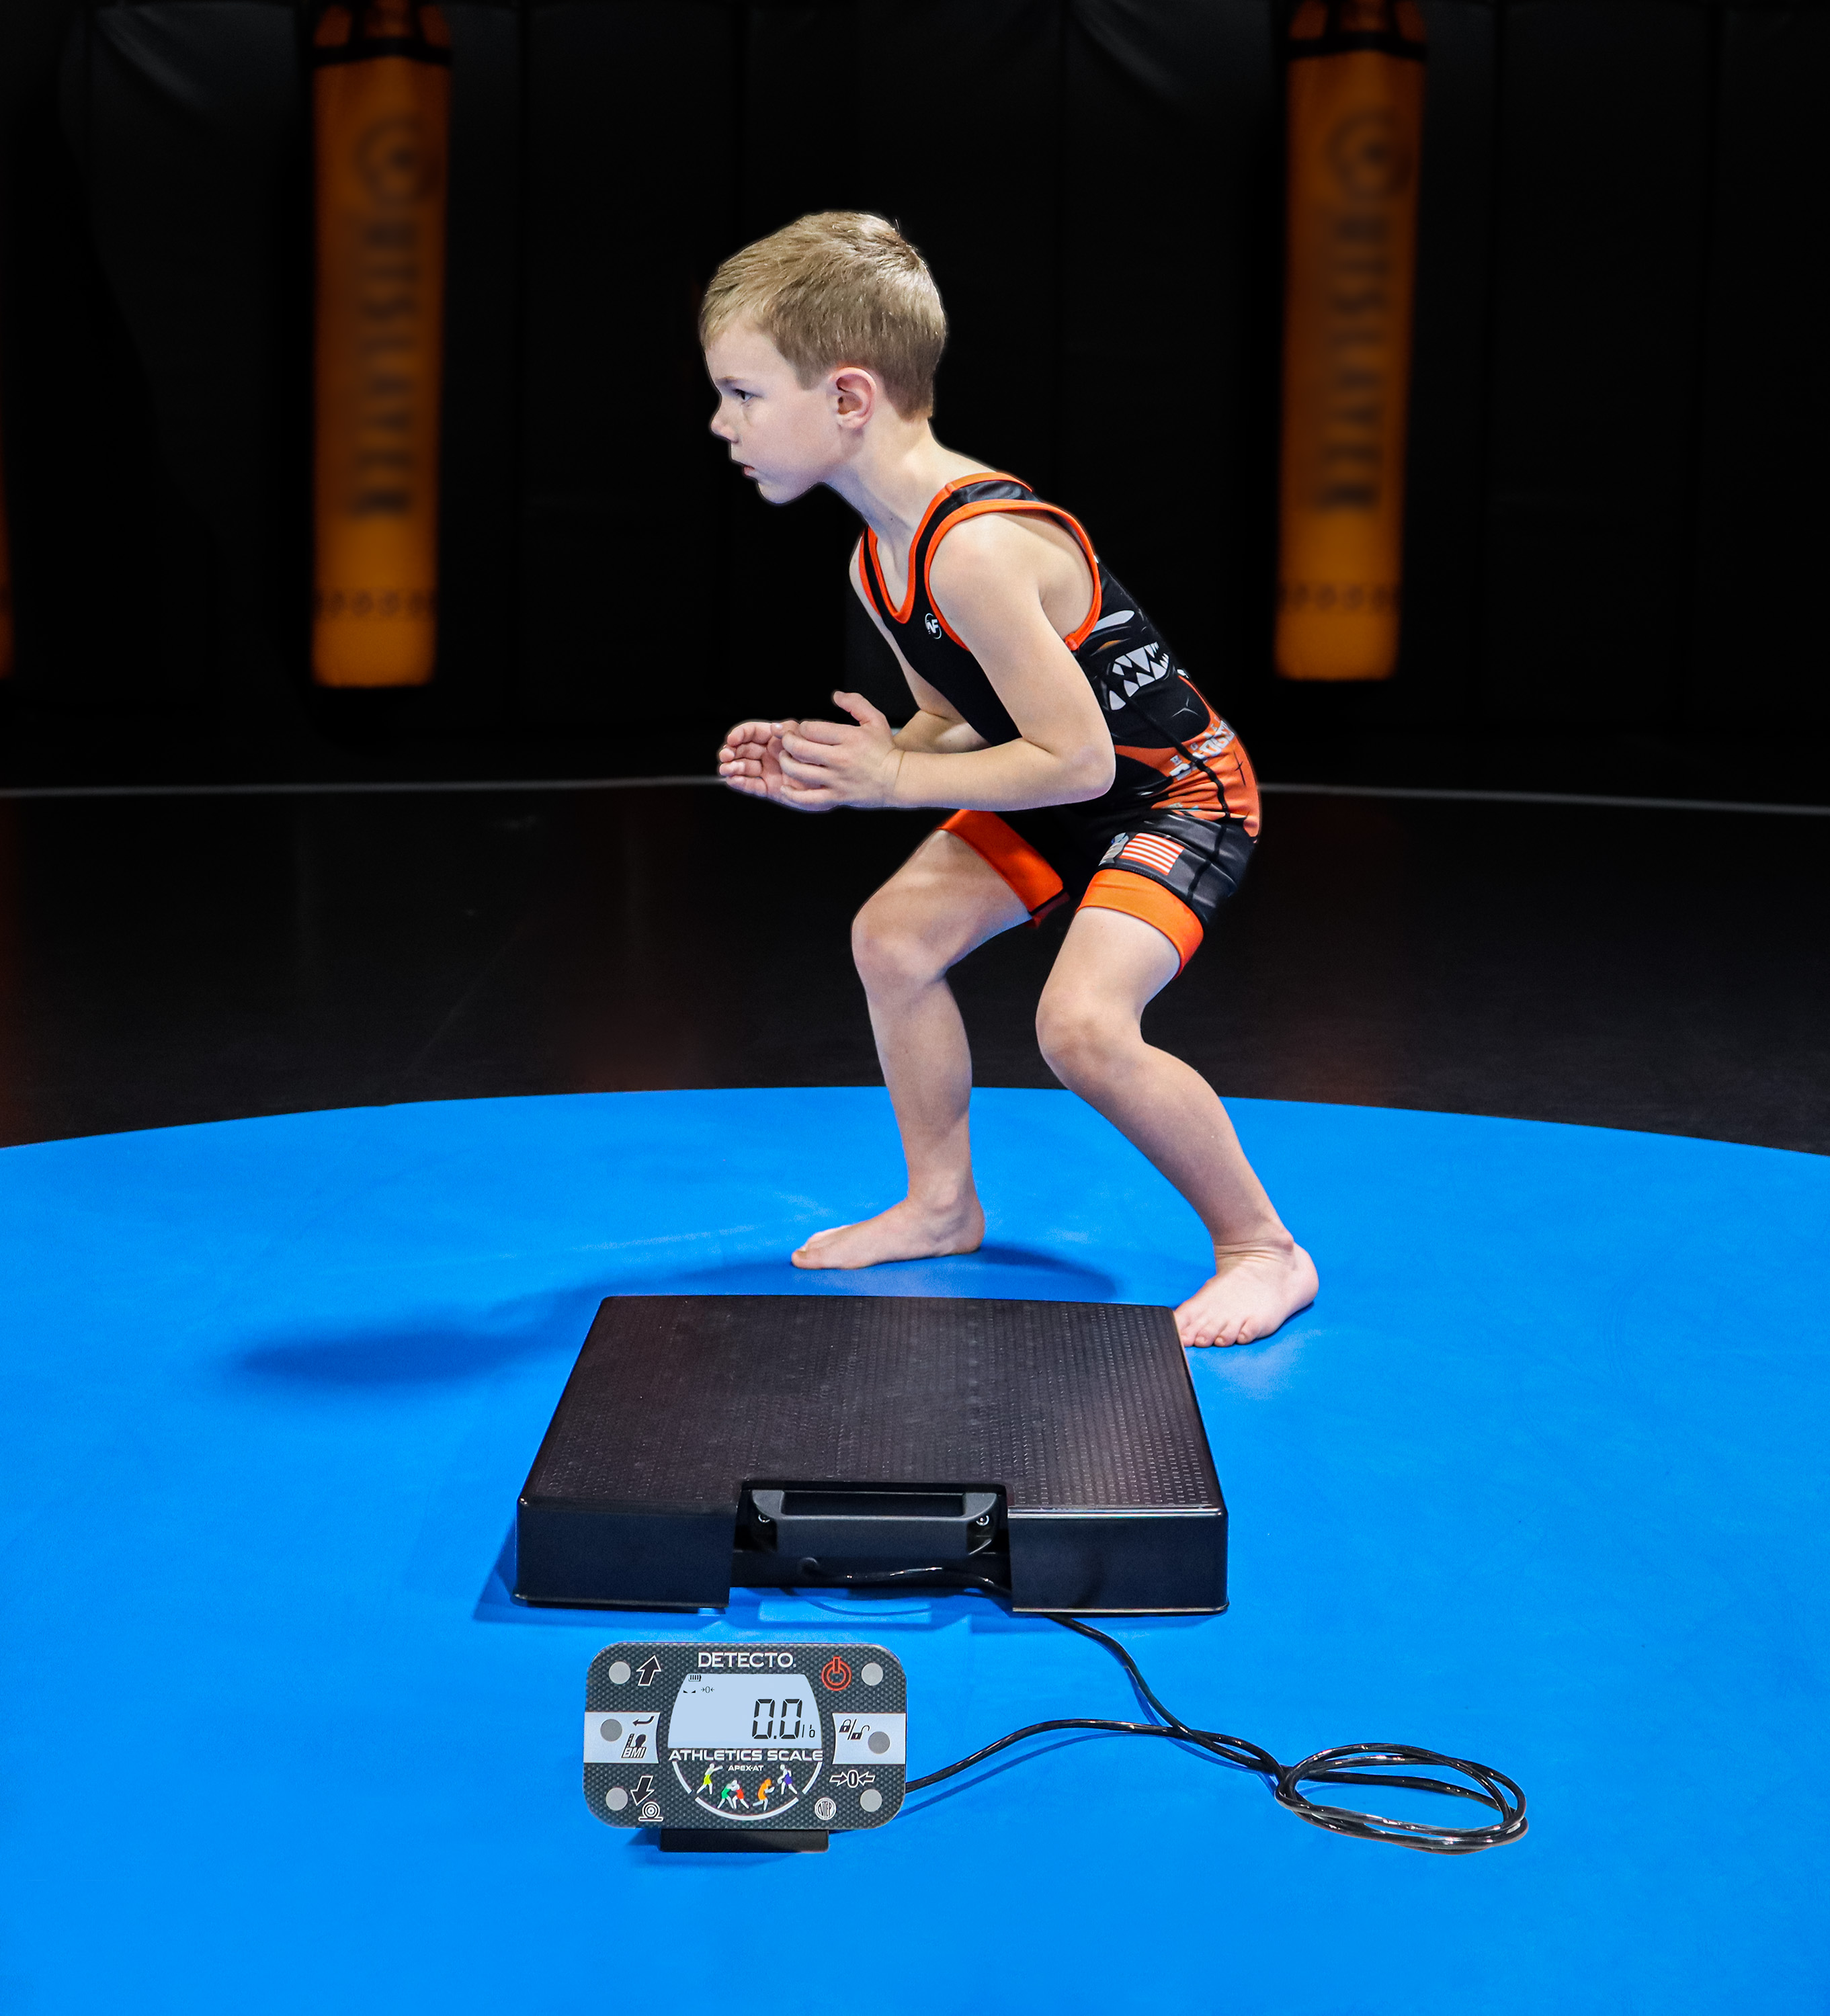 https://detecto.com/themes/ee/site/default/asset/img/product/APEX-AT_Lifestyle-Shot-Young-Boy-Wrestler-Action.jpg